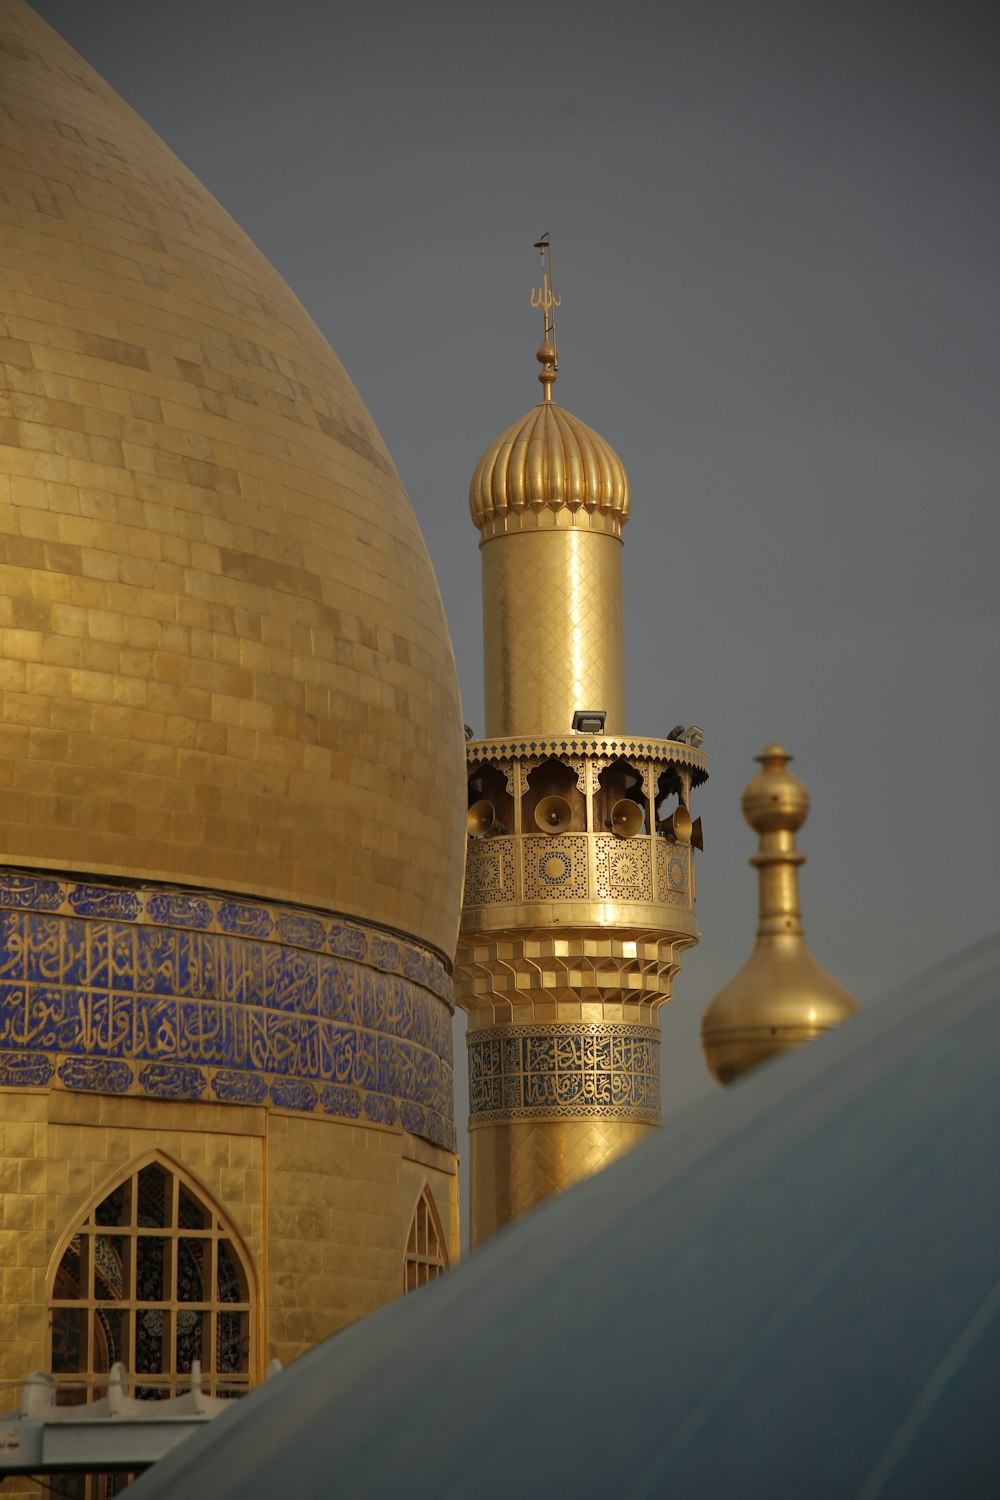 a large golden dome with a cross on top of it